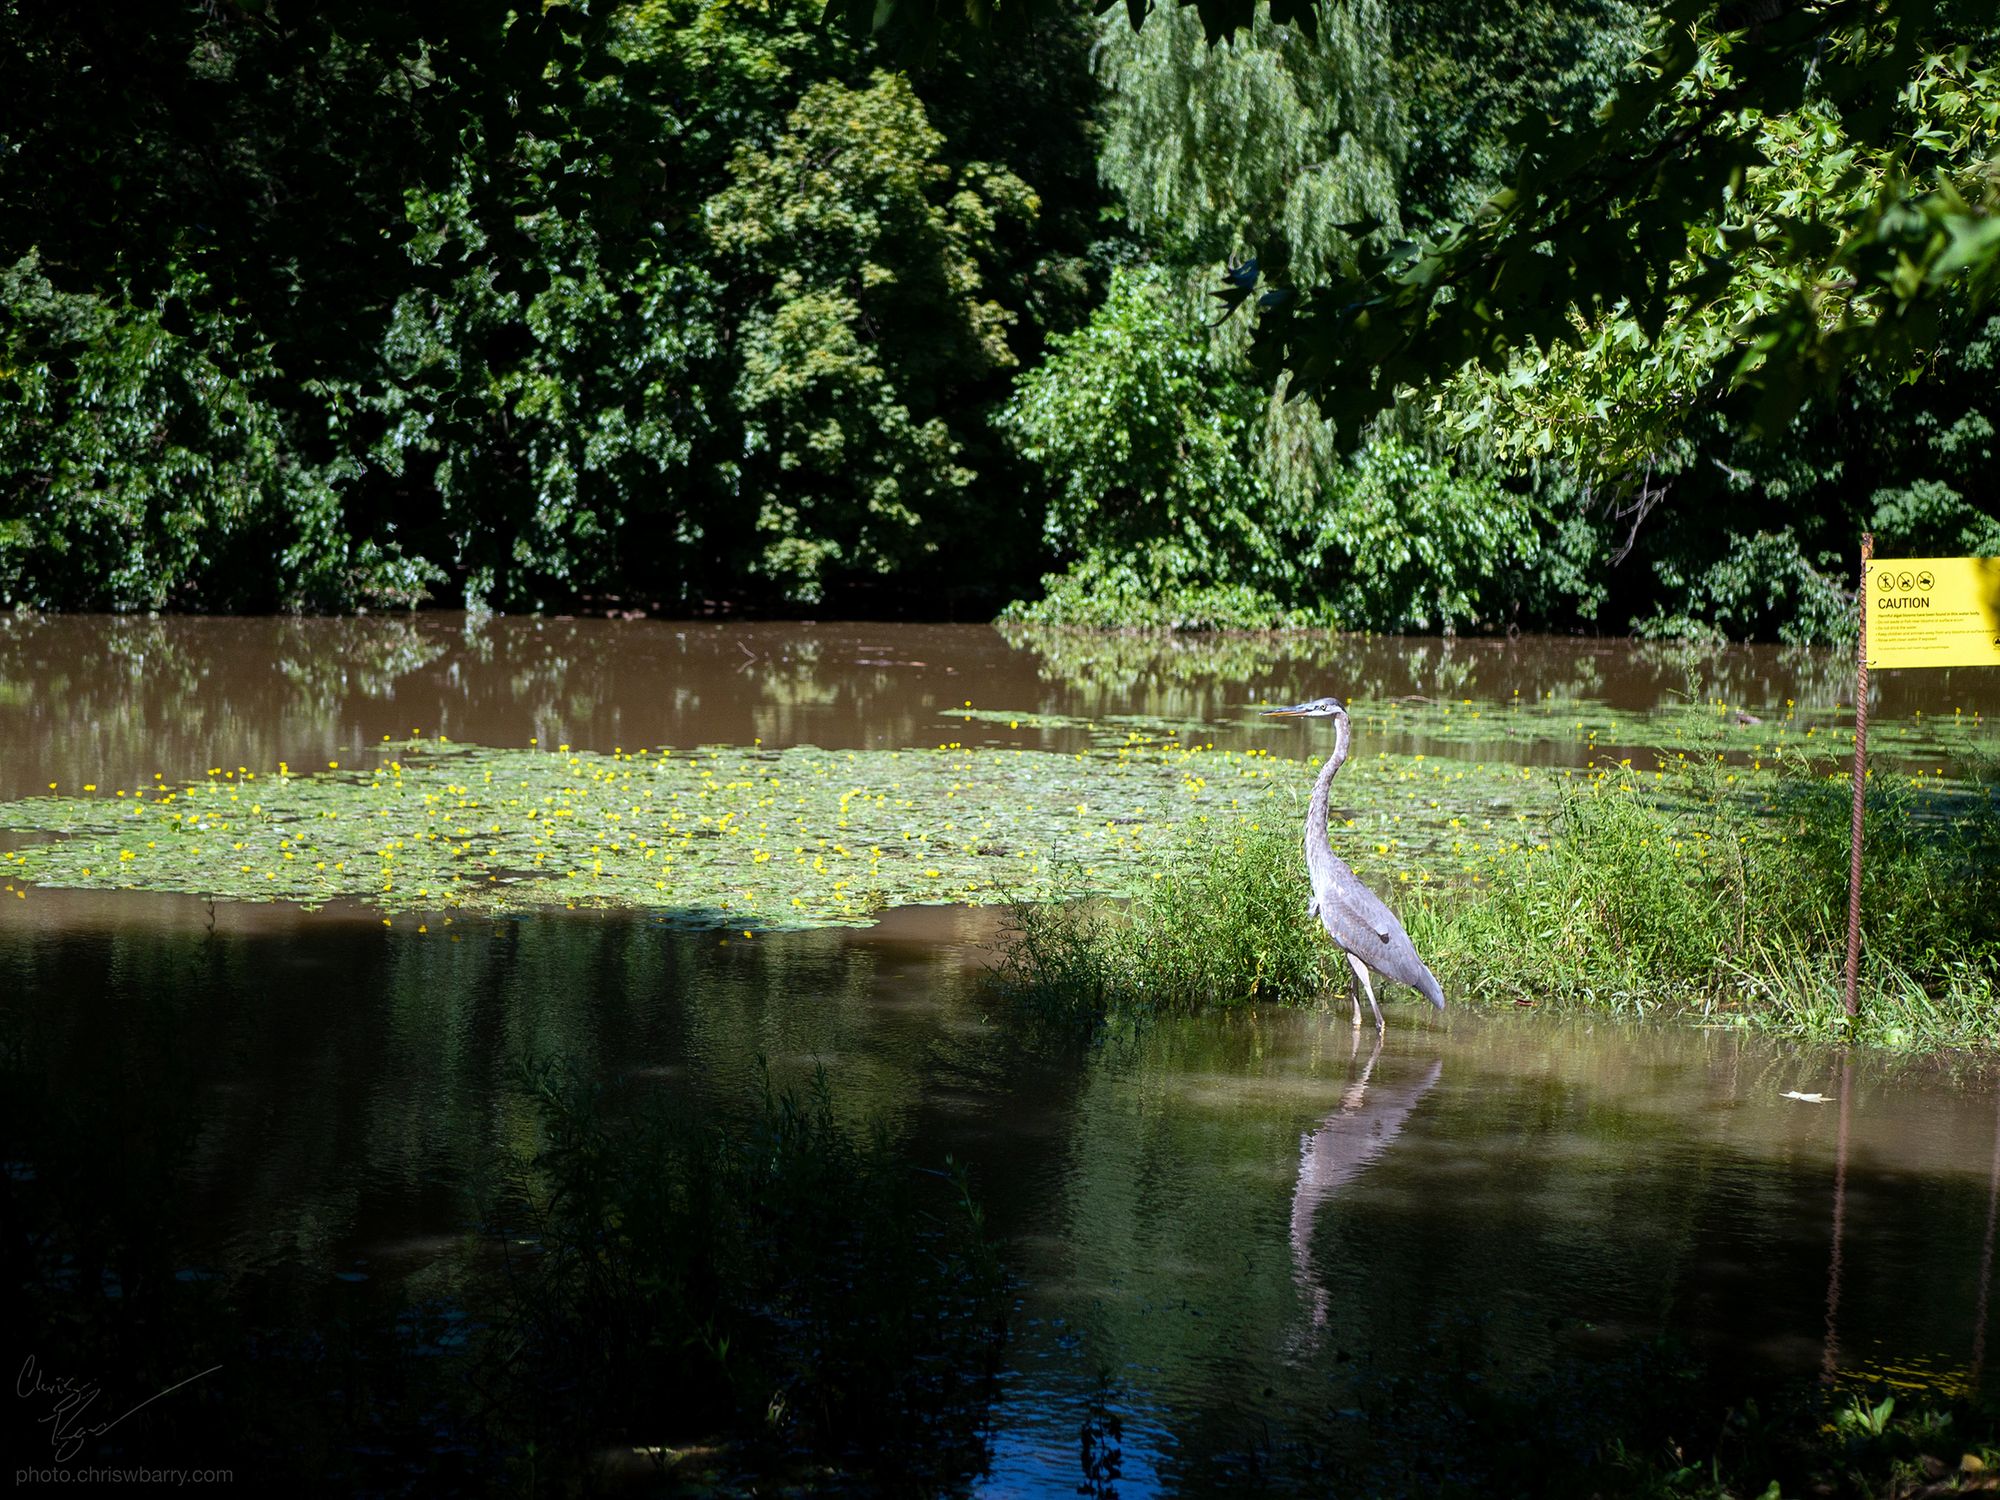 A Great Blue Heron wading in brown pond water that has overflowed its banks. Grass and flowers are visible